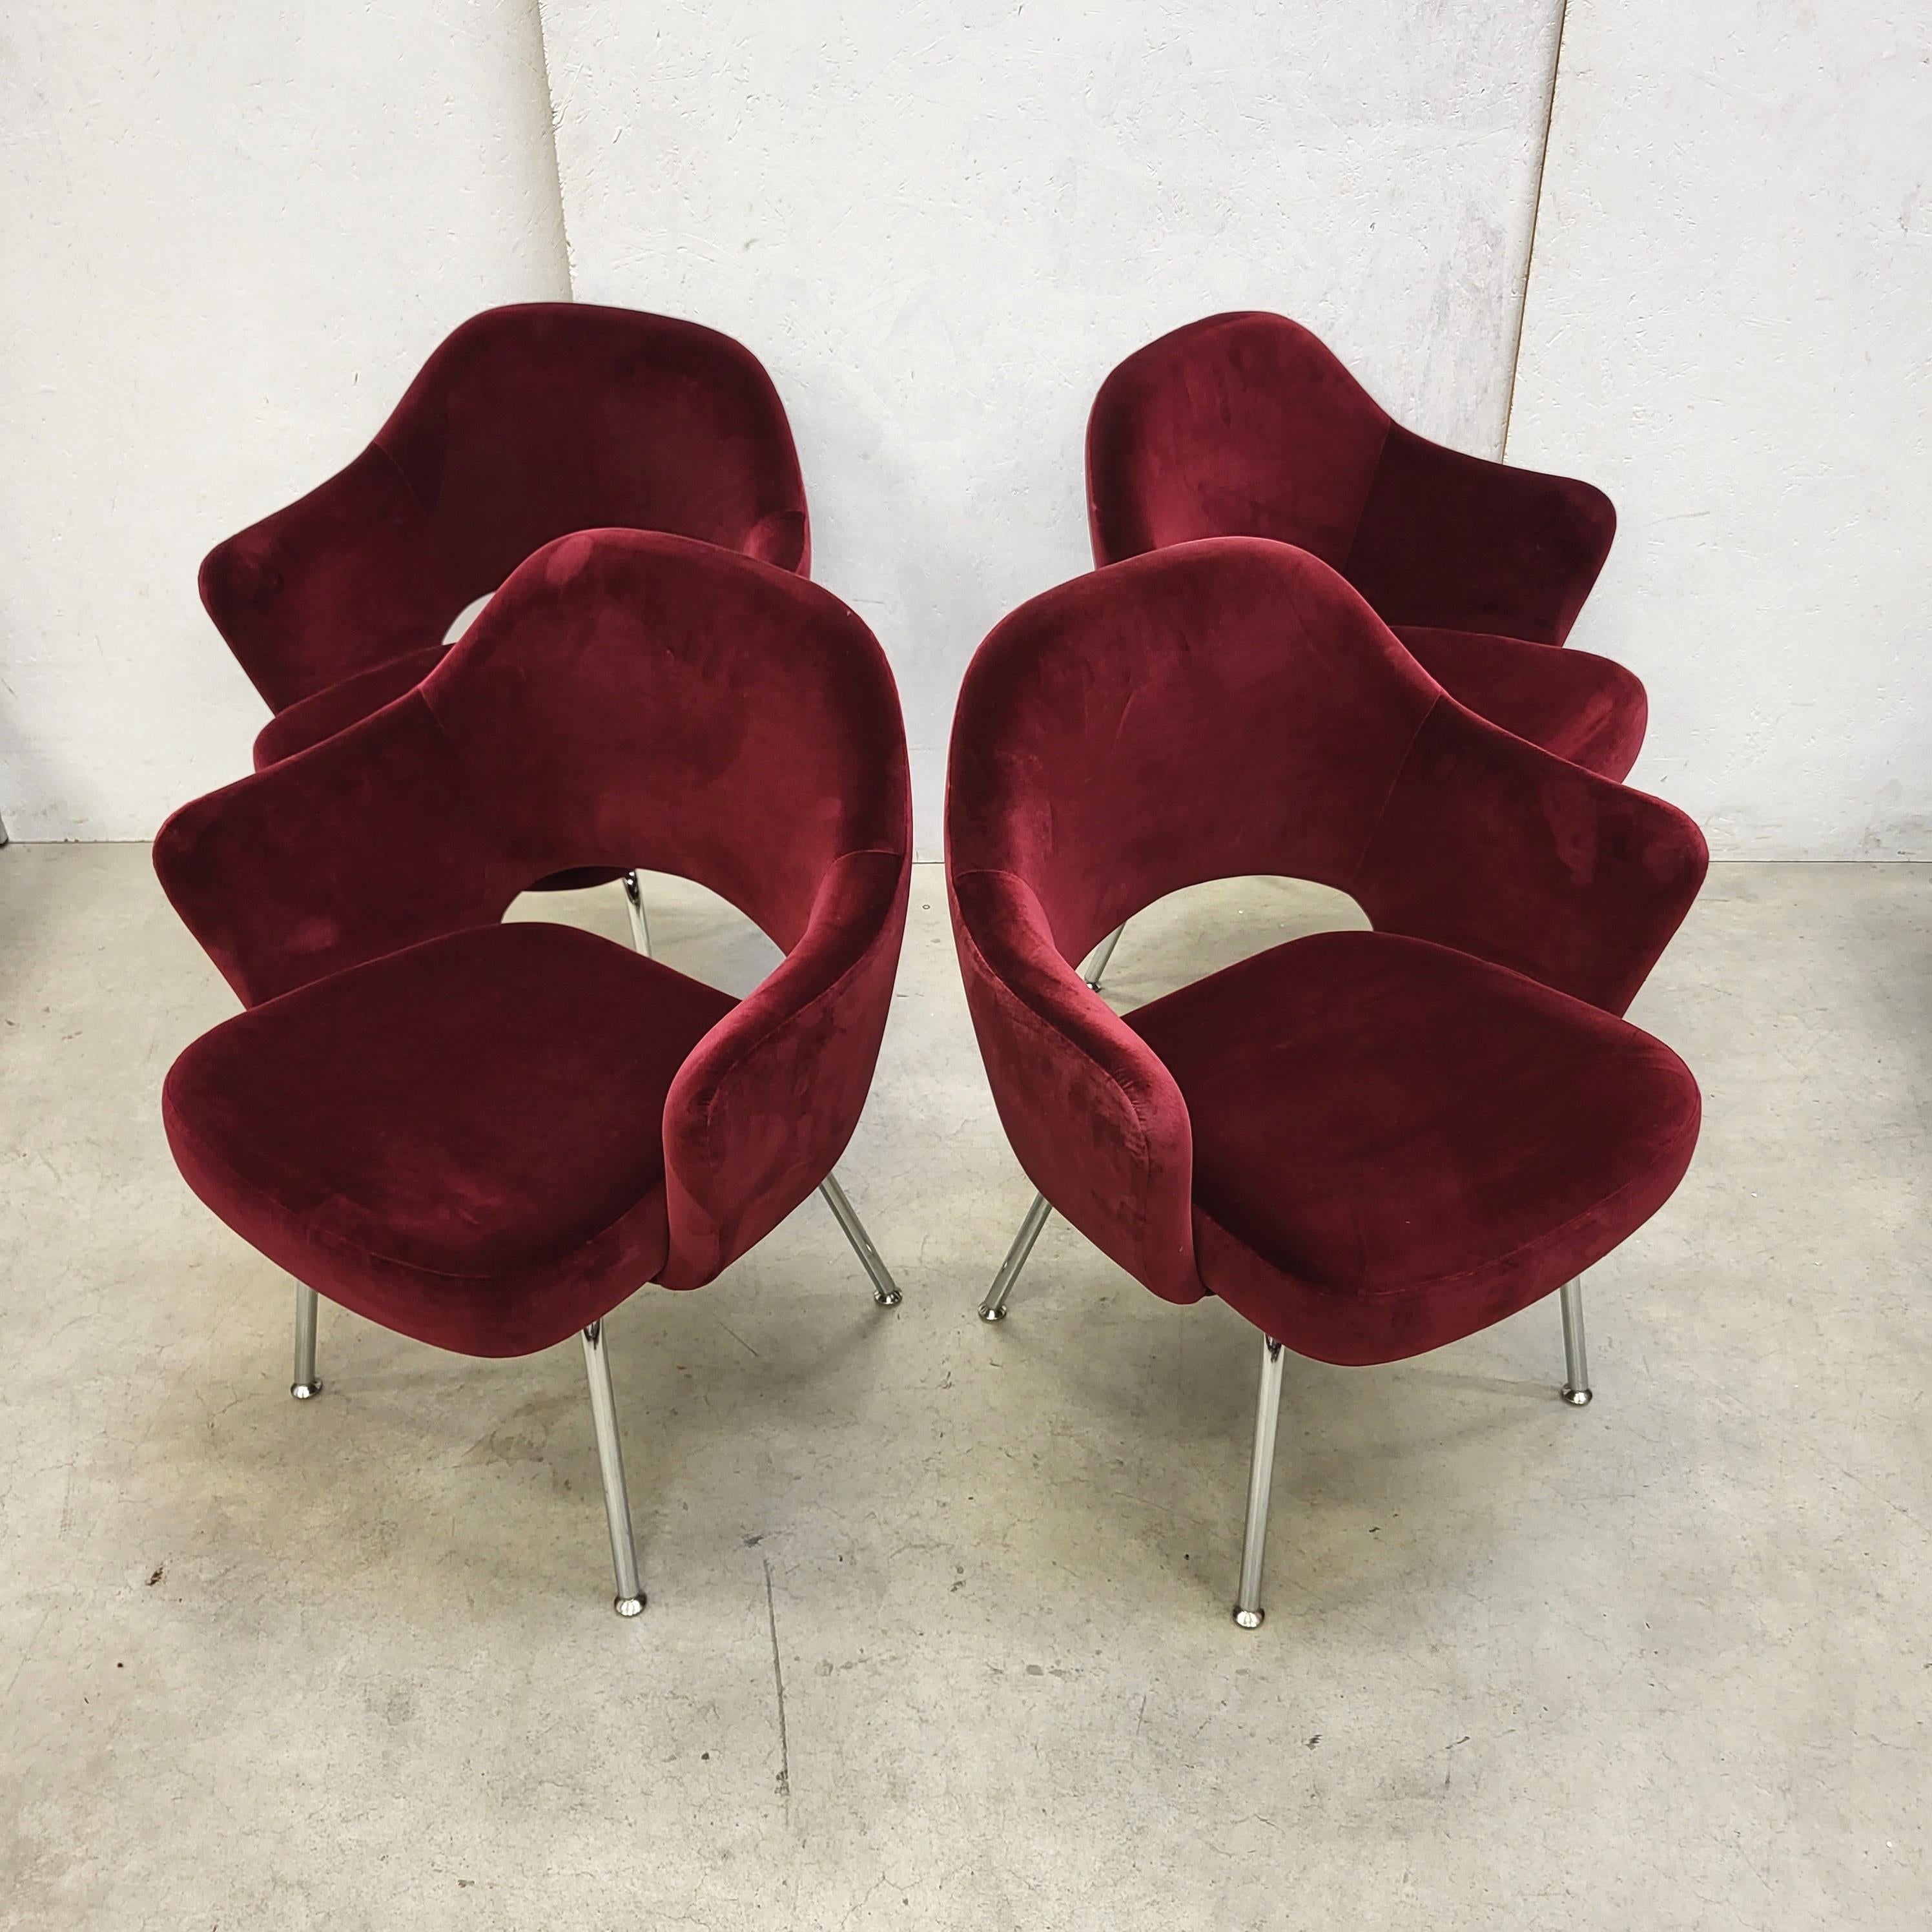 Set of 4 Executive armchairs designed by Eero Saarinen for Knoll International dated around 2010.
The armchairs are covered with a very fine Bayberry high end velvet which is very smooth.

Useable as dining chair or conference chair.
Overall in an